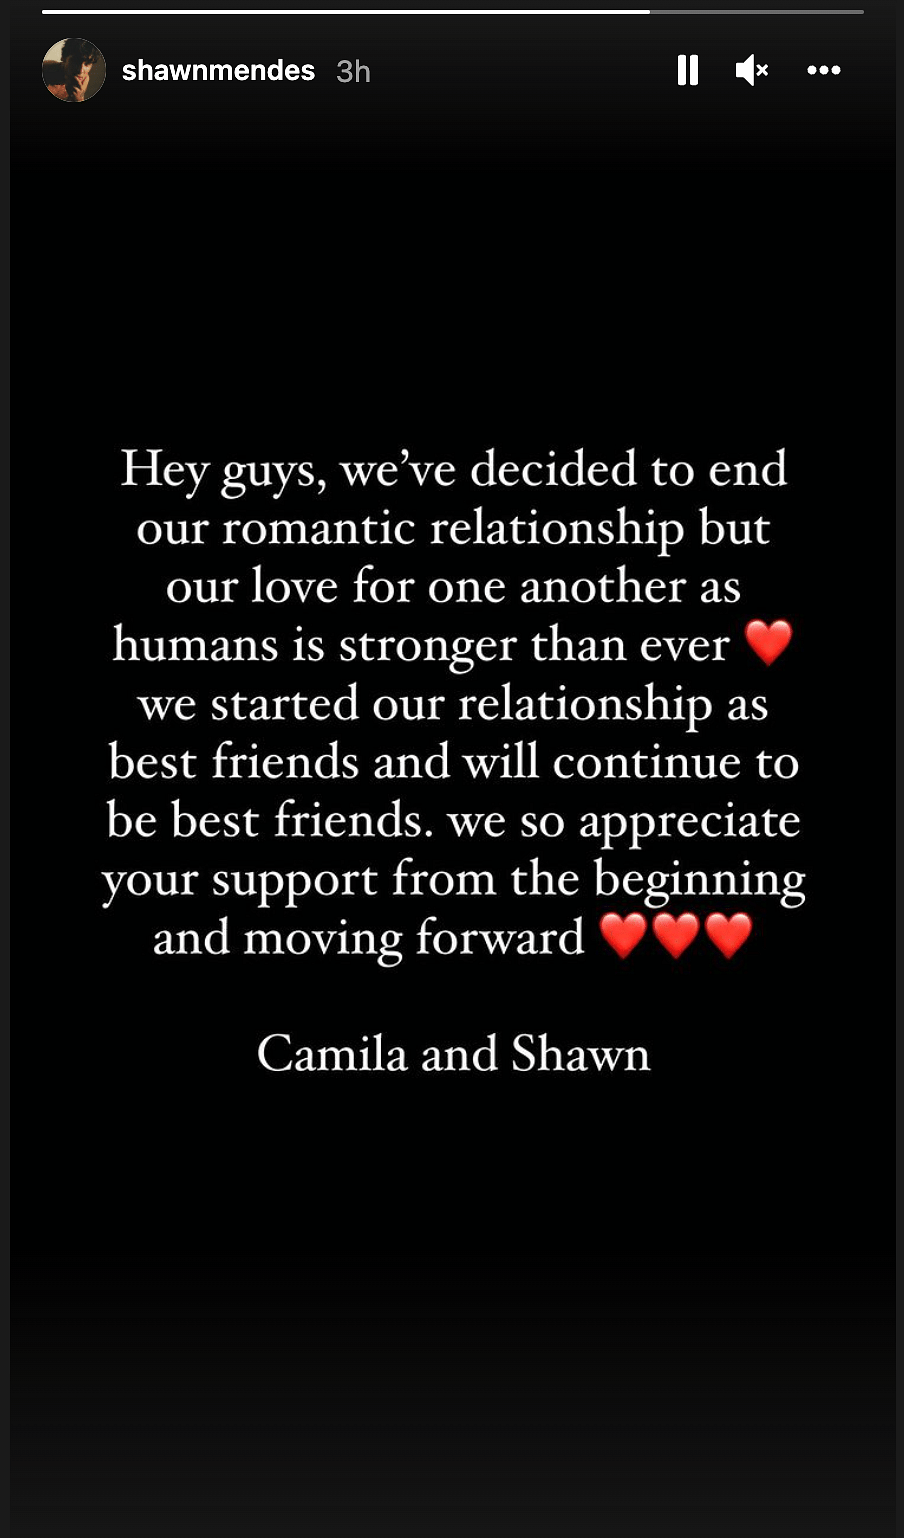 Camila Cabello & Shawn Mendes started dating in 2019.